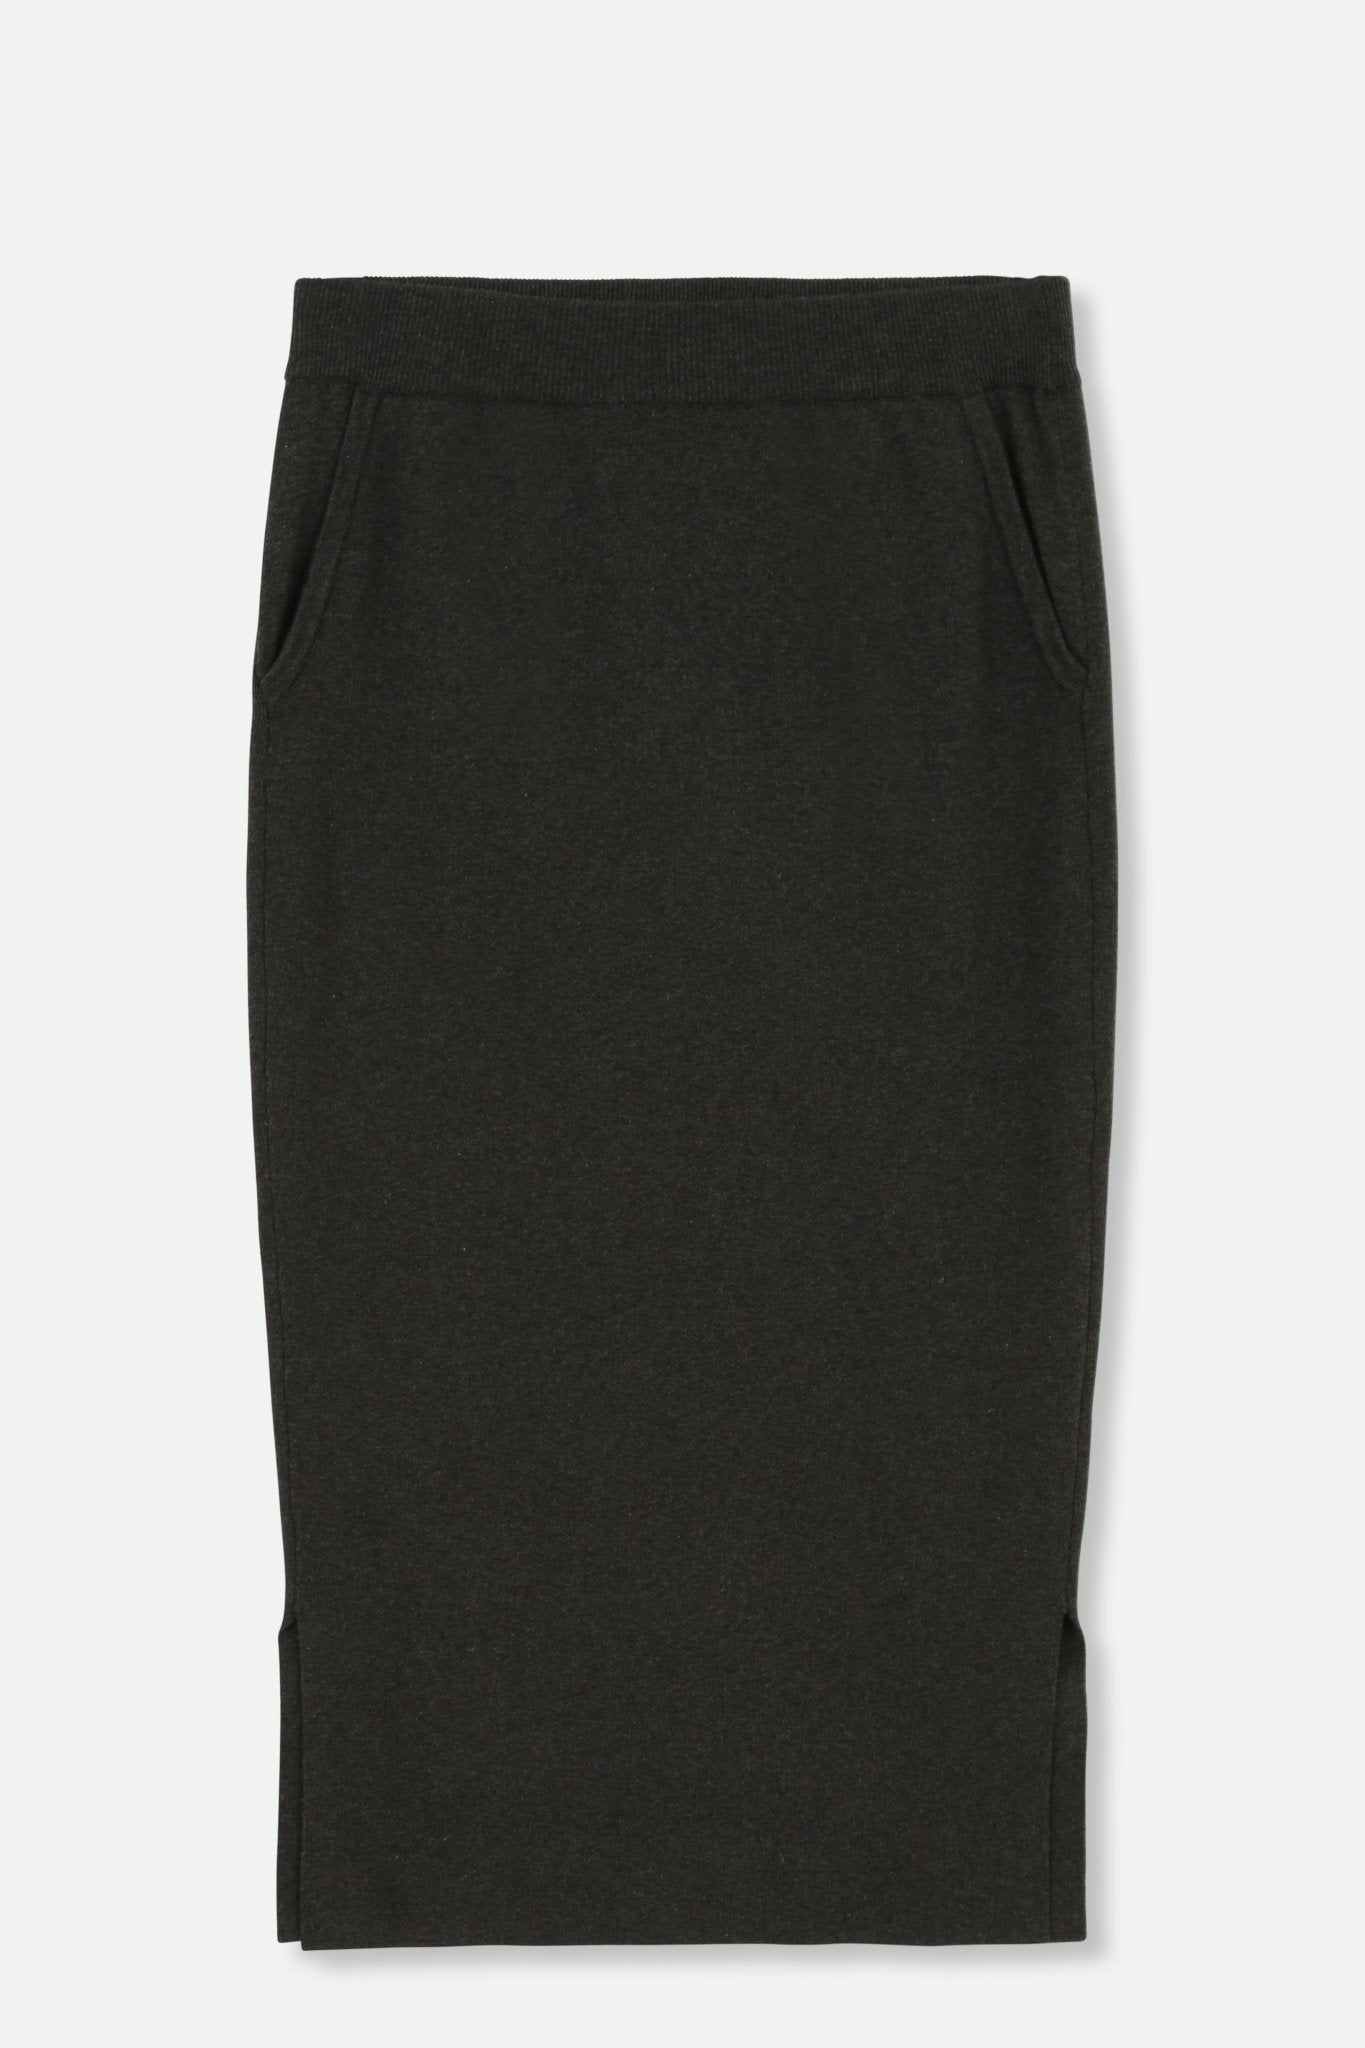 SICILY PENCIL SKIRT IN KNIT PIMA COTTON STRETCH IN HEATHER CHARCOAL - Jarbo